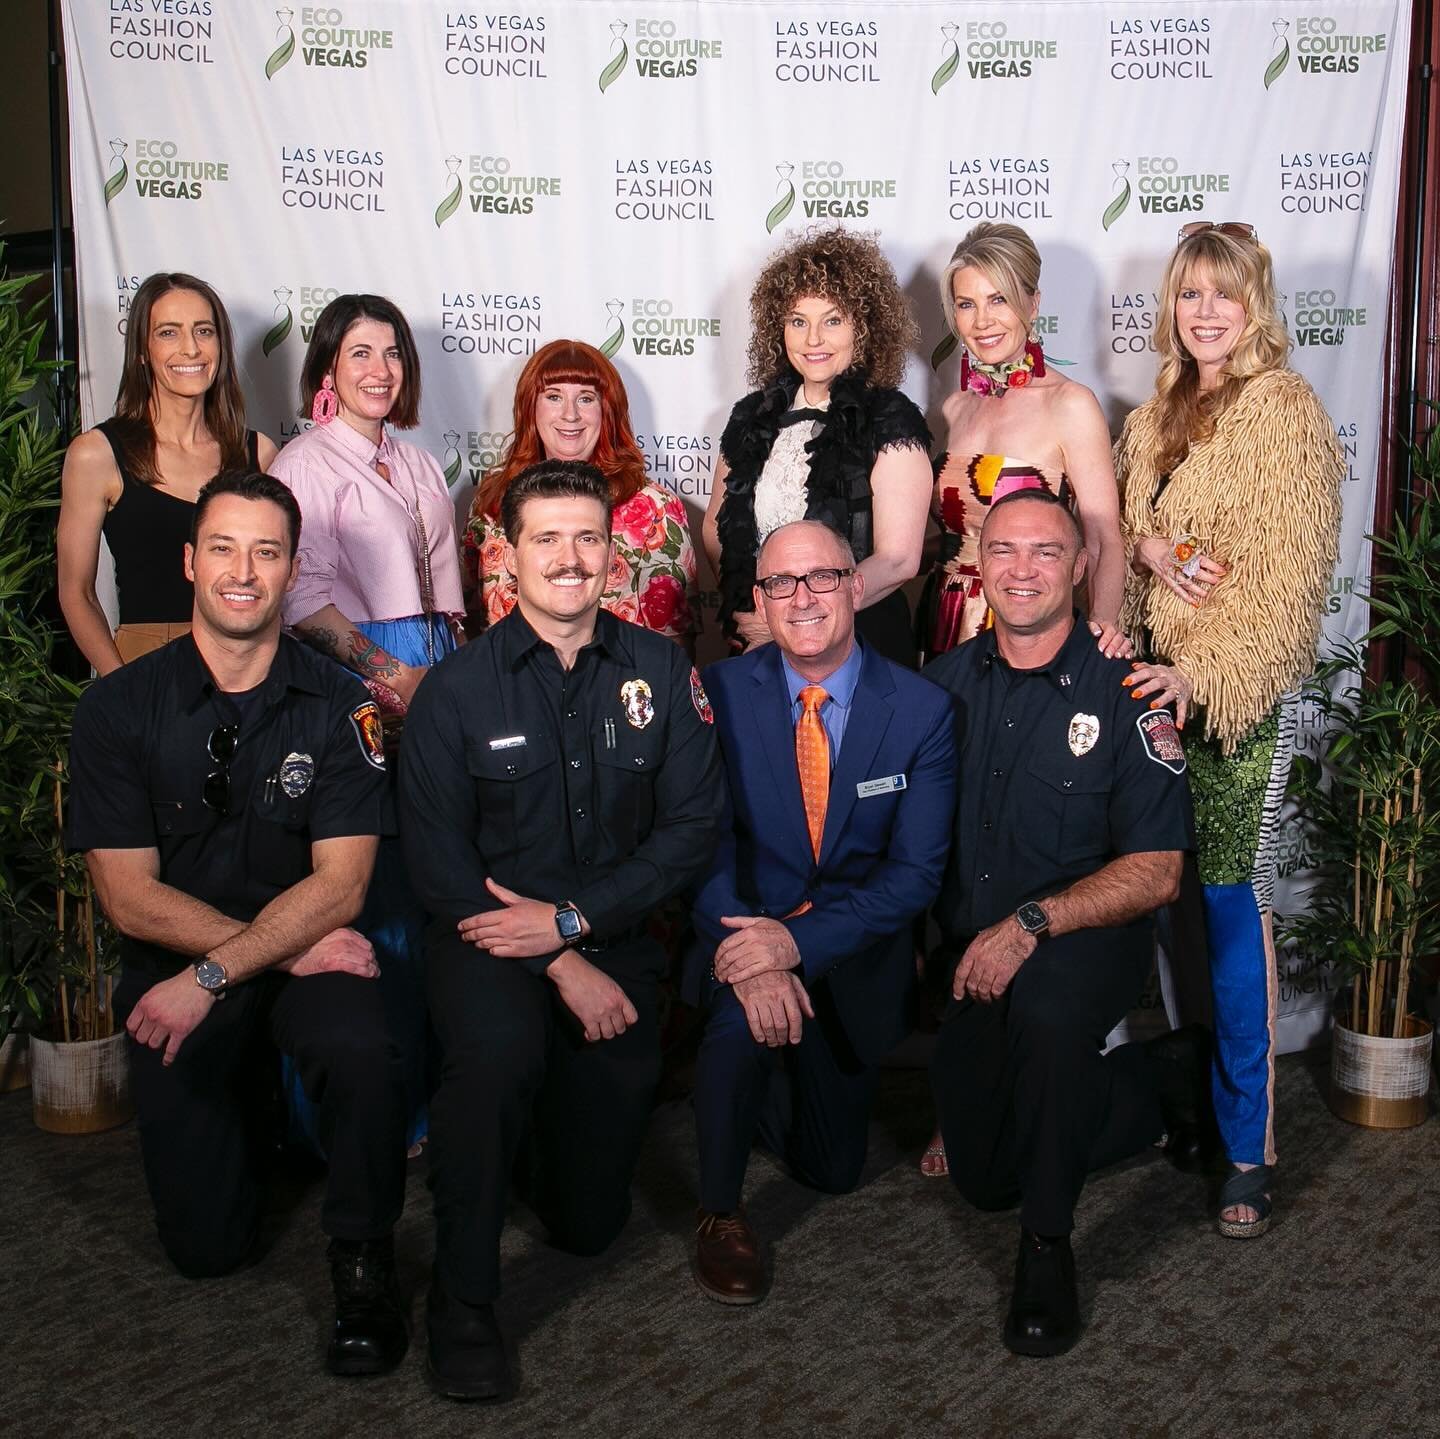 🔥 Look who we spotted at our latest Eco Couture Vegas event&mdash;our brave firefighters! 💪 Please show your support for these real-life heroes by making a donation and voting for them in the Southern Nevada Burn Foundation Firefighter Auction happ